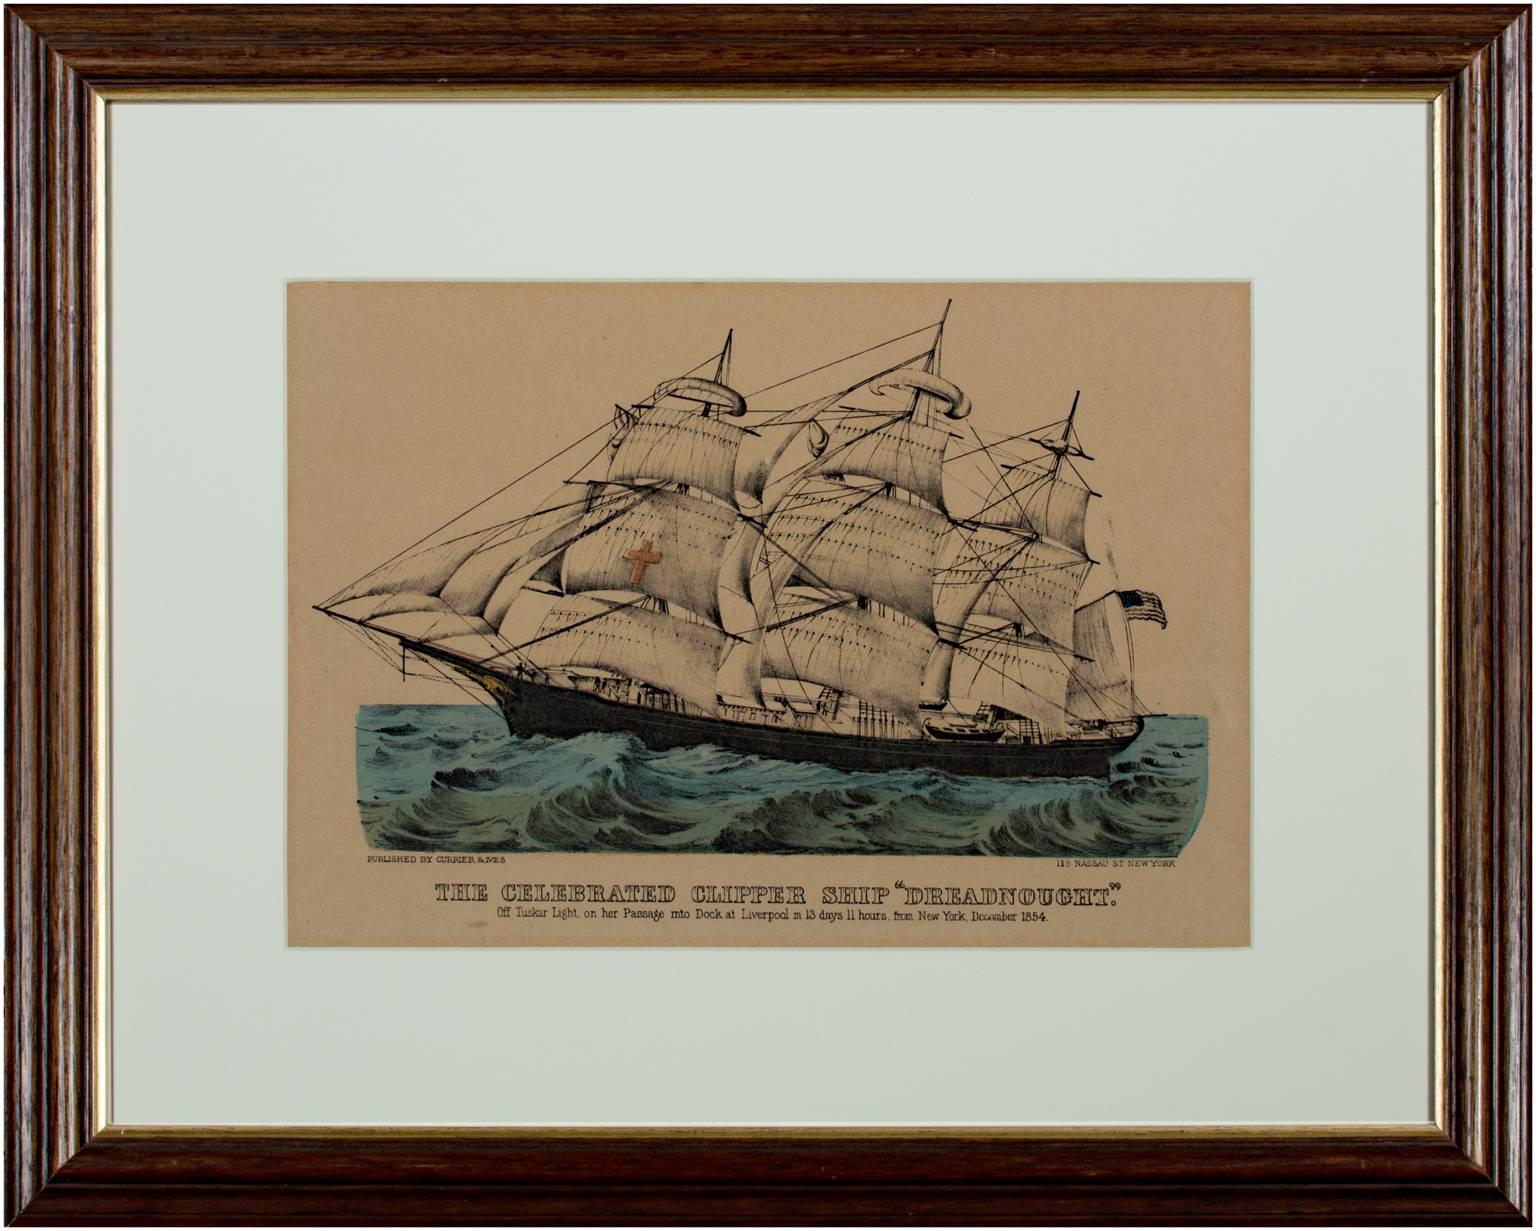 „The Celebrated Clipper Ship Dreadnought“, Original-Lithographie von Currier & Ives im Angebot 3